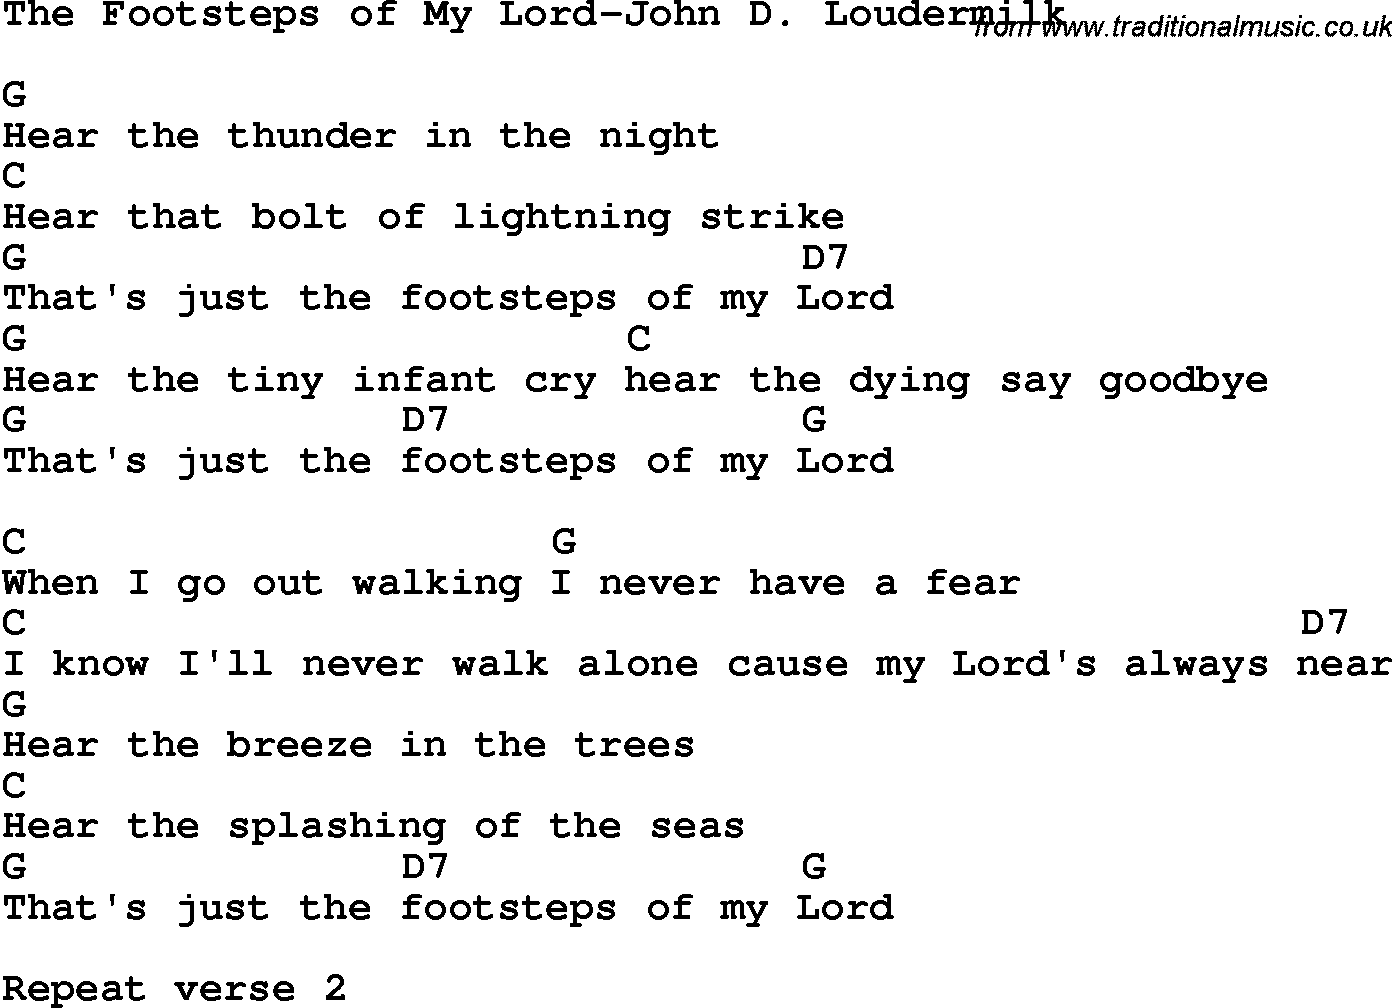 Country, Southern and Bluegrass Gospel Song The Footsteps of My Lord-John D Loudermilk lyrics and chords